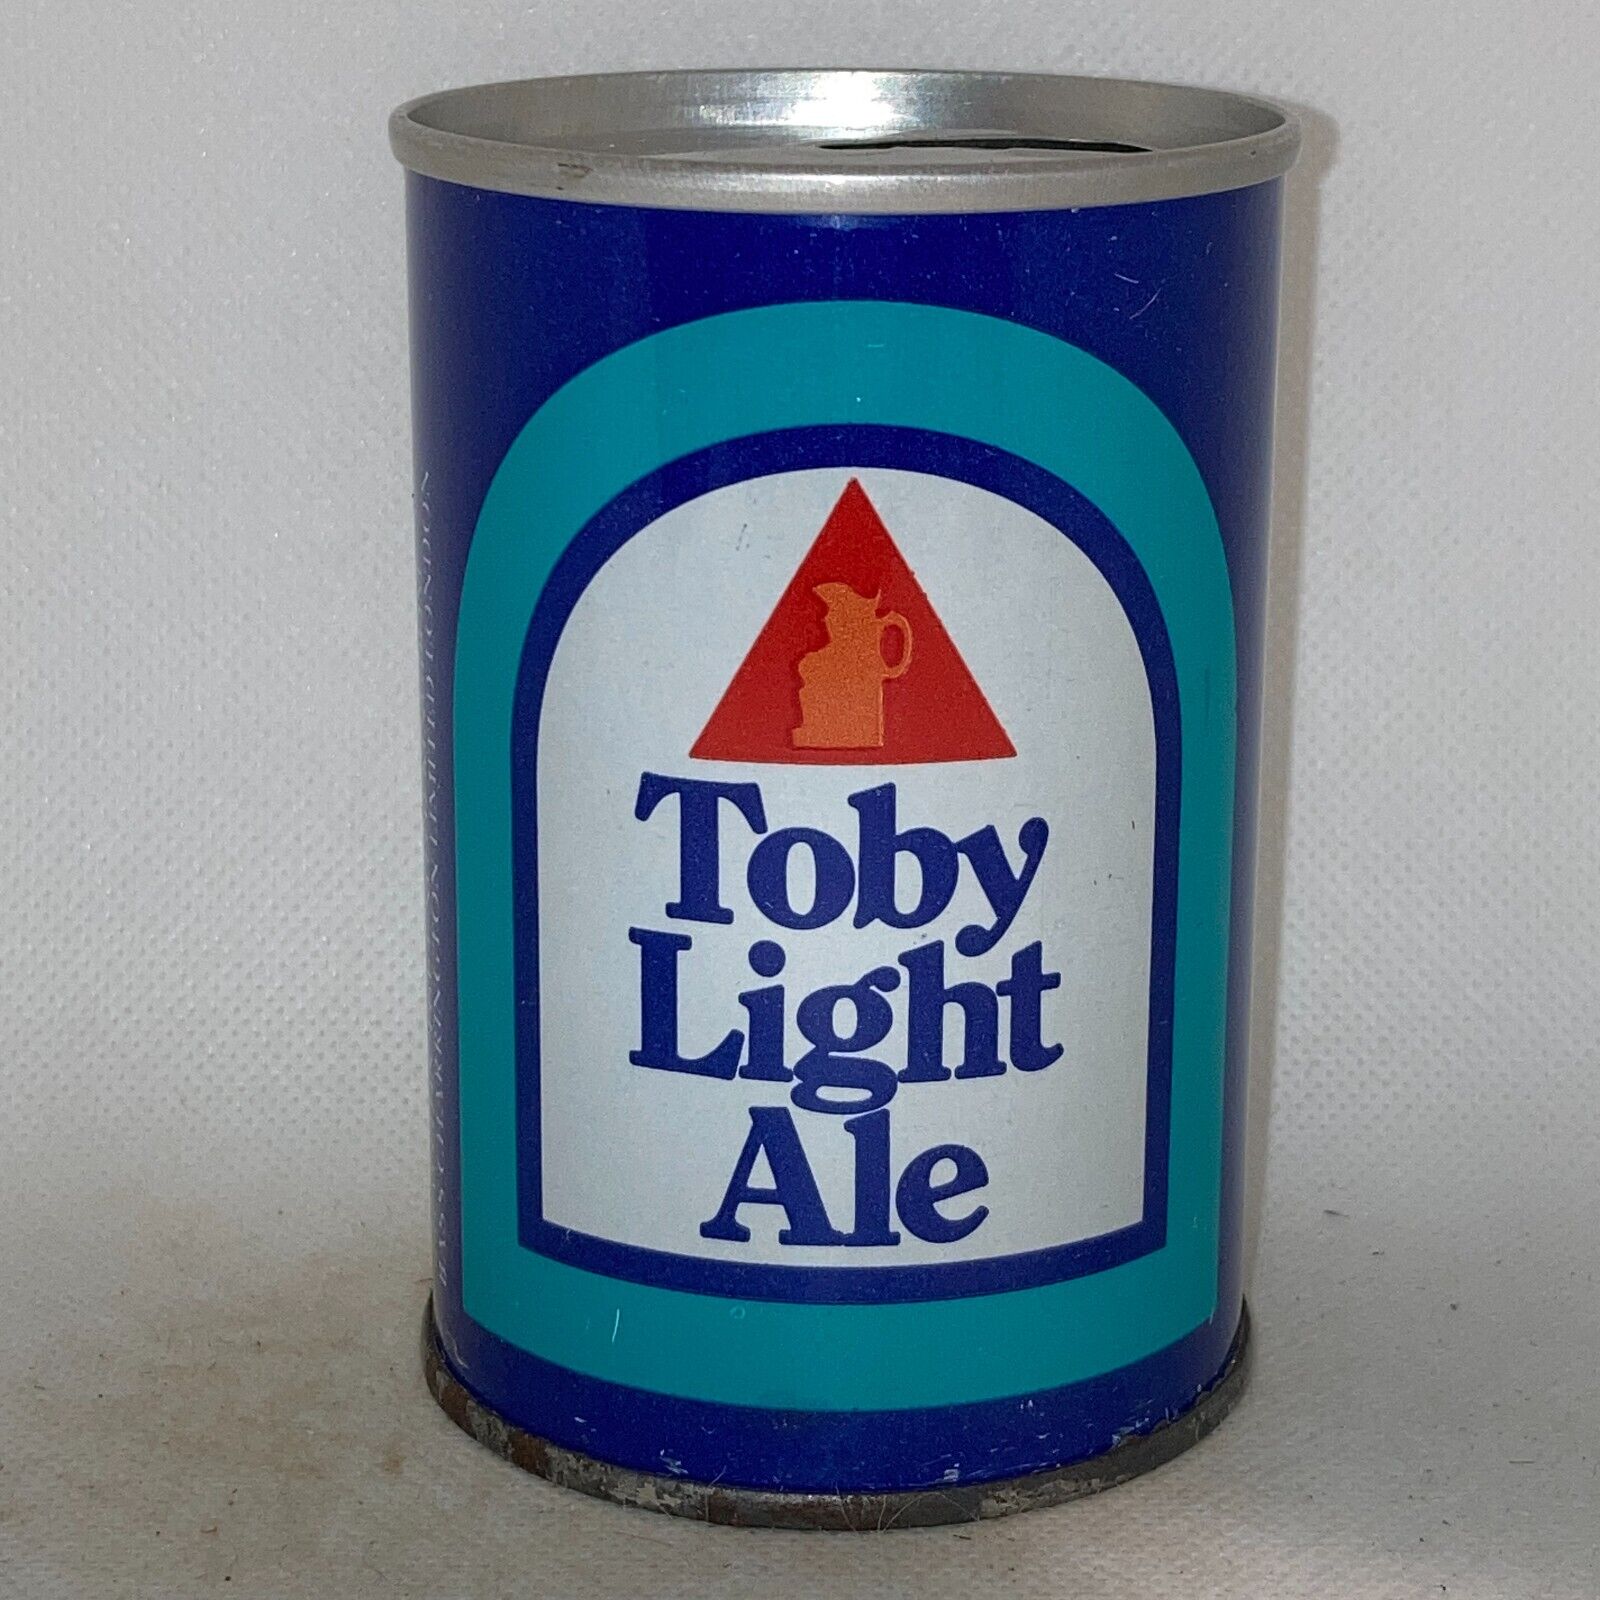 Toby Light Ale 9-2/3 oz beer can, straight steel, England